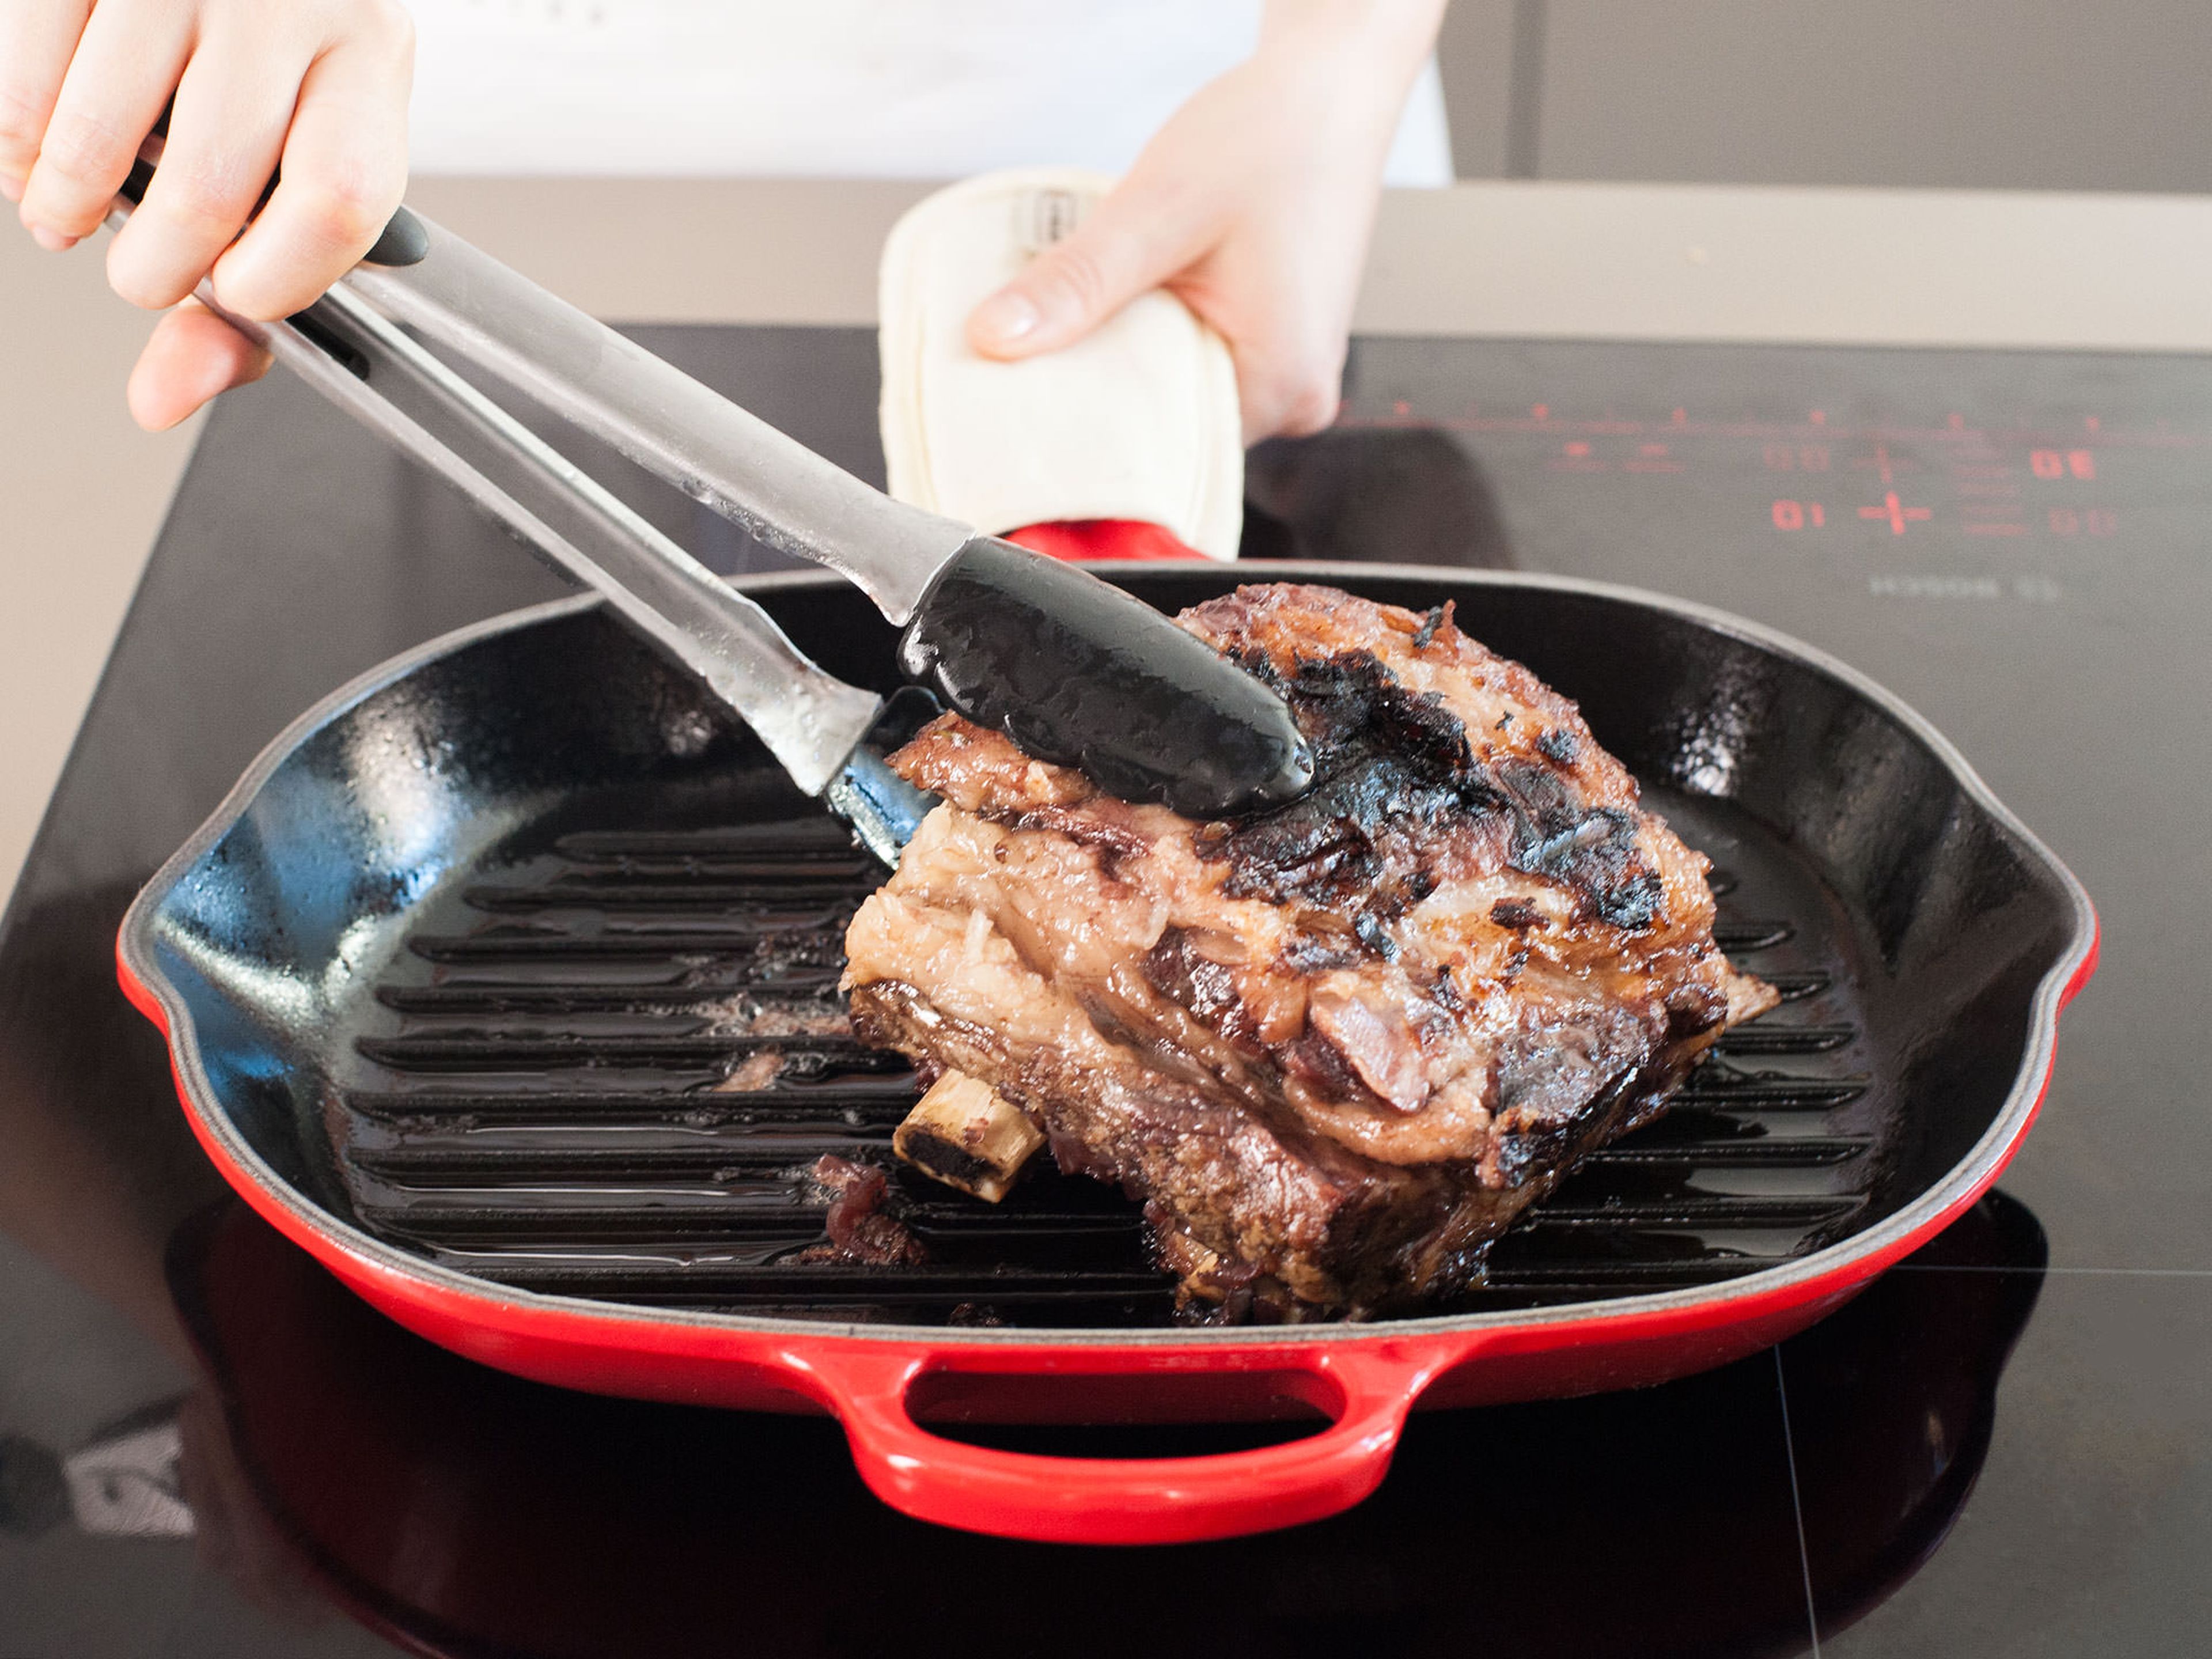 Heat a grill pan or grill to medium-high. Grill the short ribs until the skin is charred on all sides.